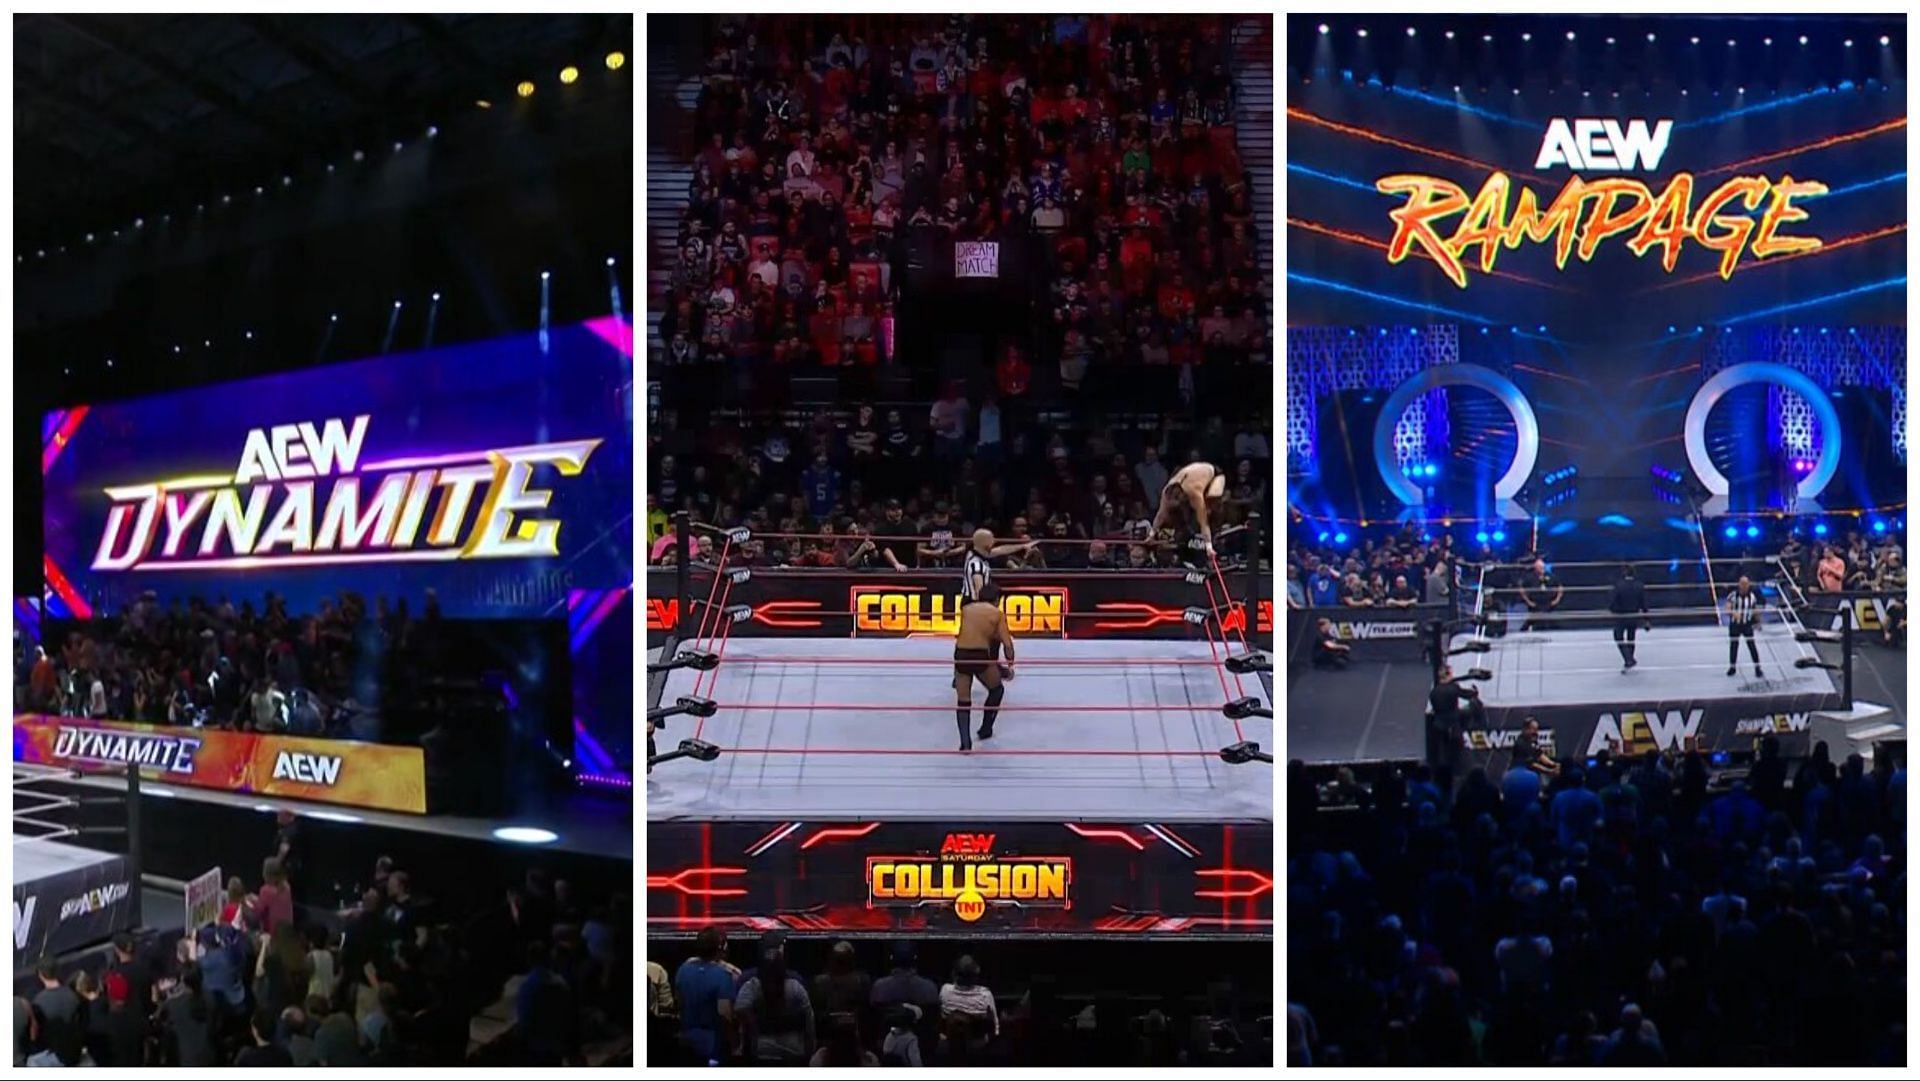 A look at the AEW Dynamite, Rampage and Collision sets